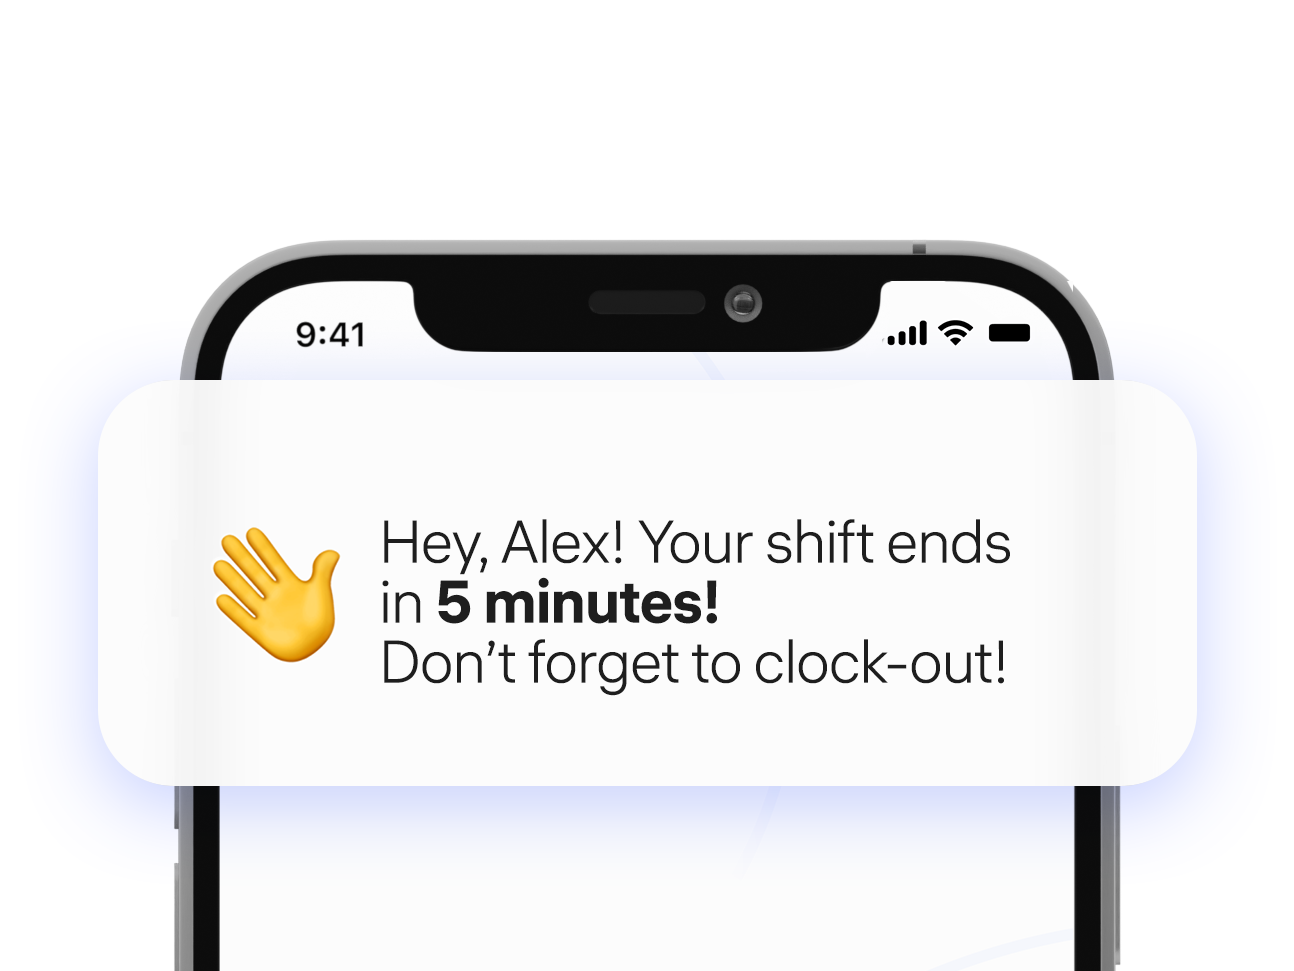 Push notifications constantly remind employees about clock-ins and clock-outs so that effective work hours are accounted for